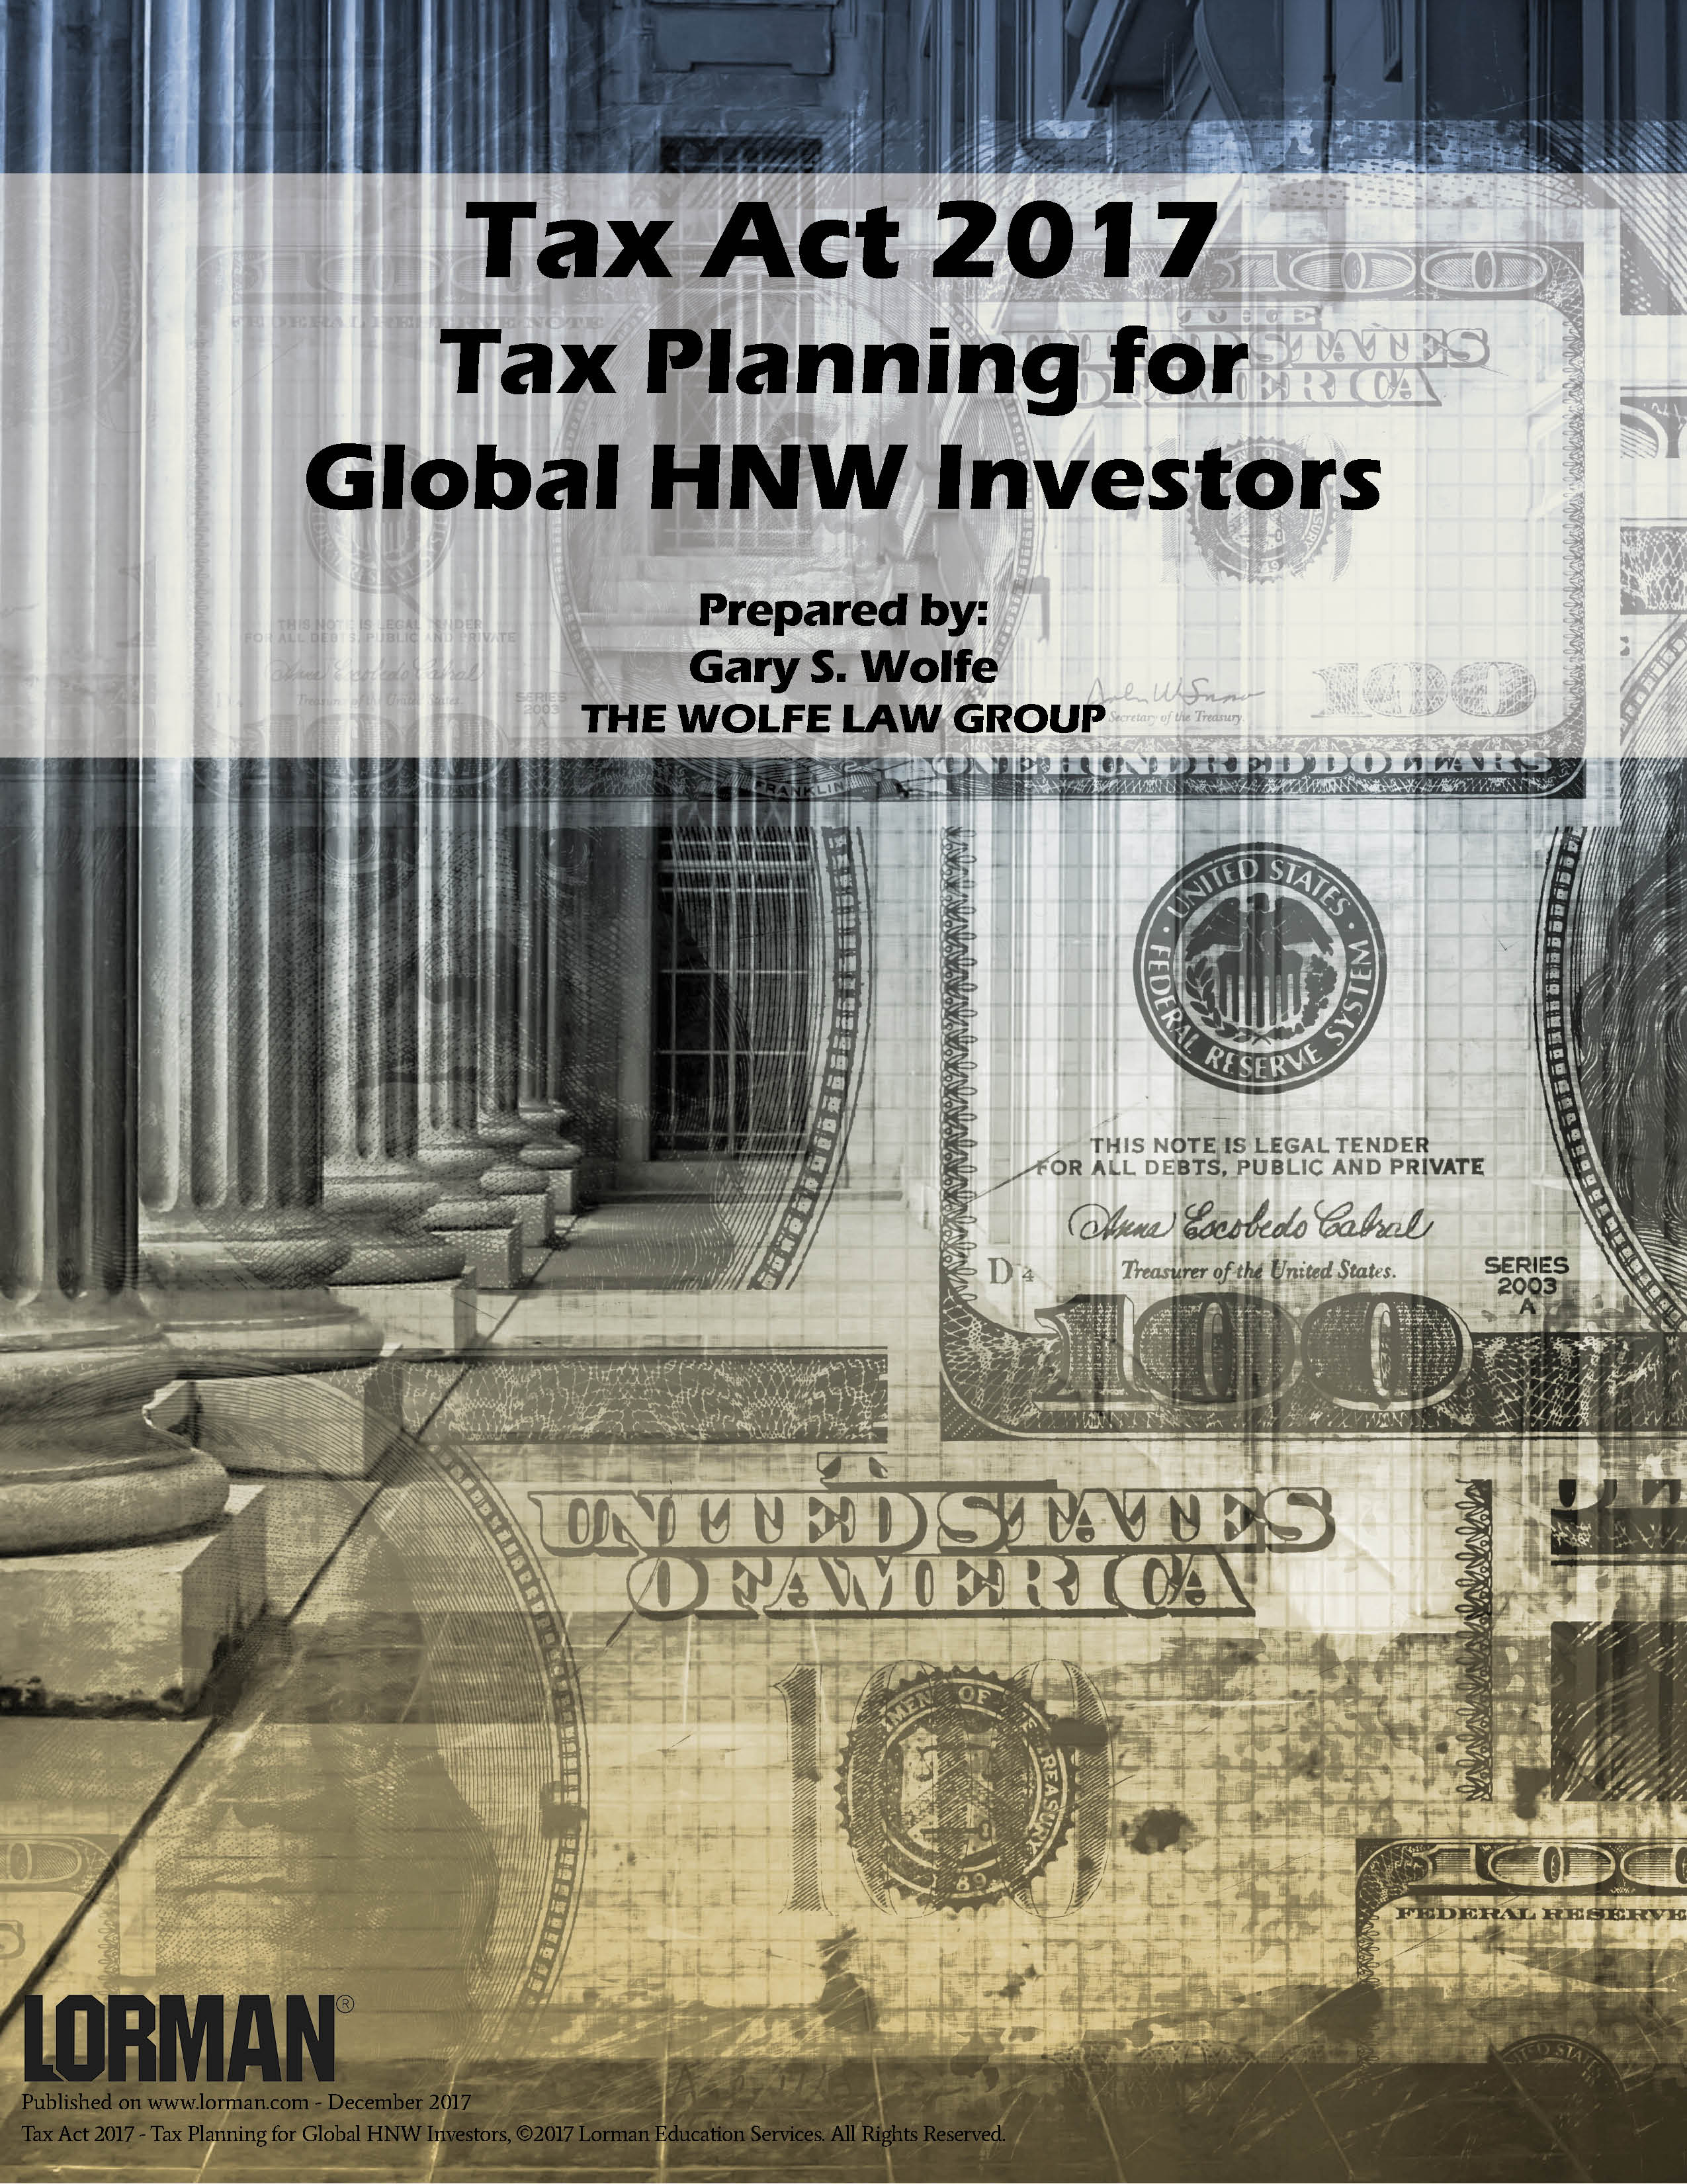 Tax Act 2017 - Tax Planning for Global HNW Investors